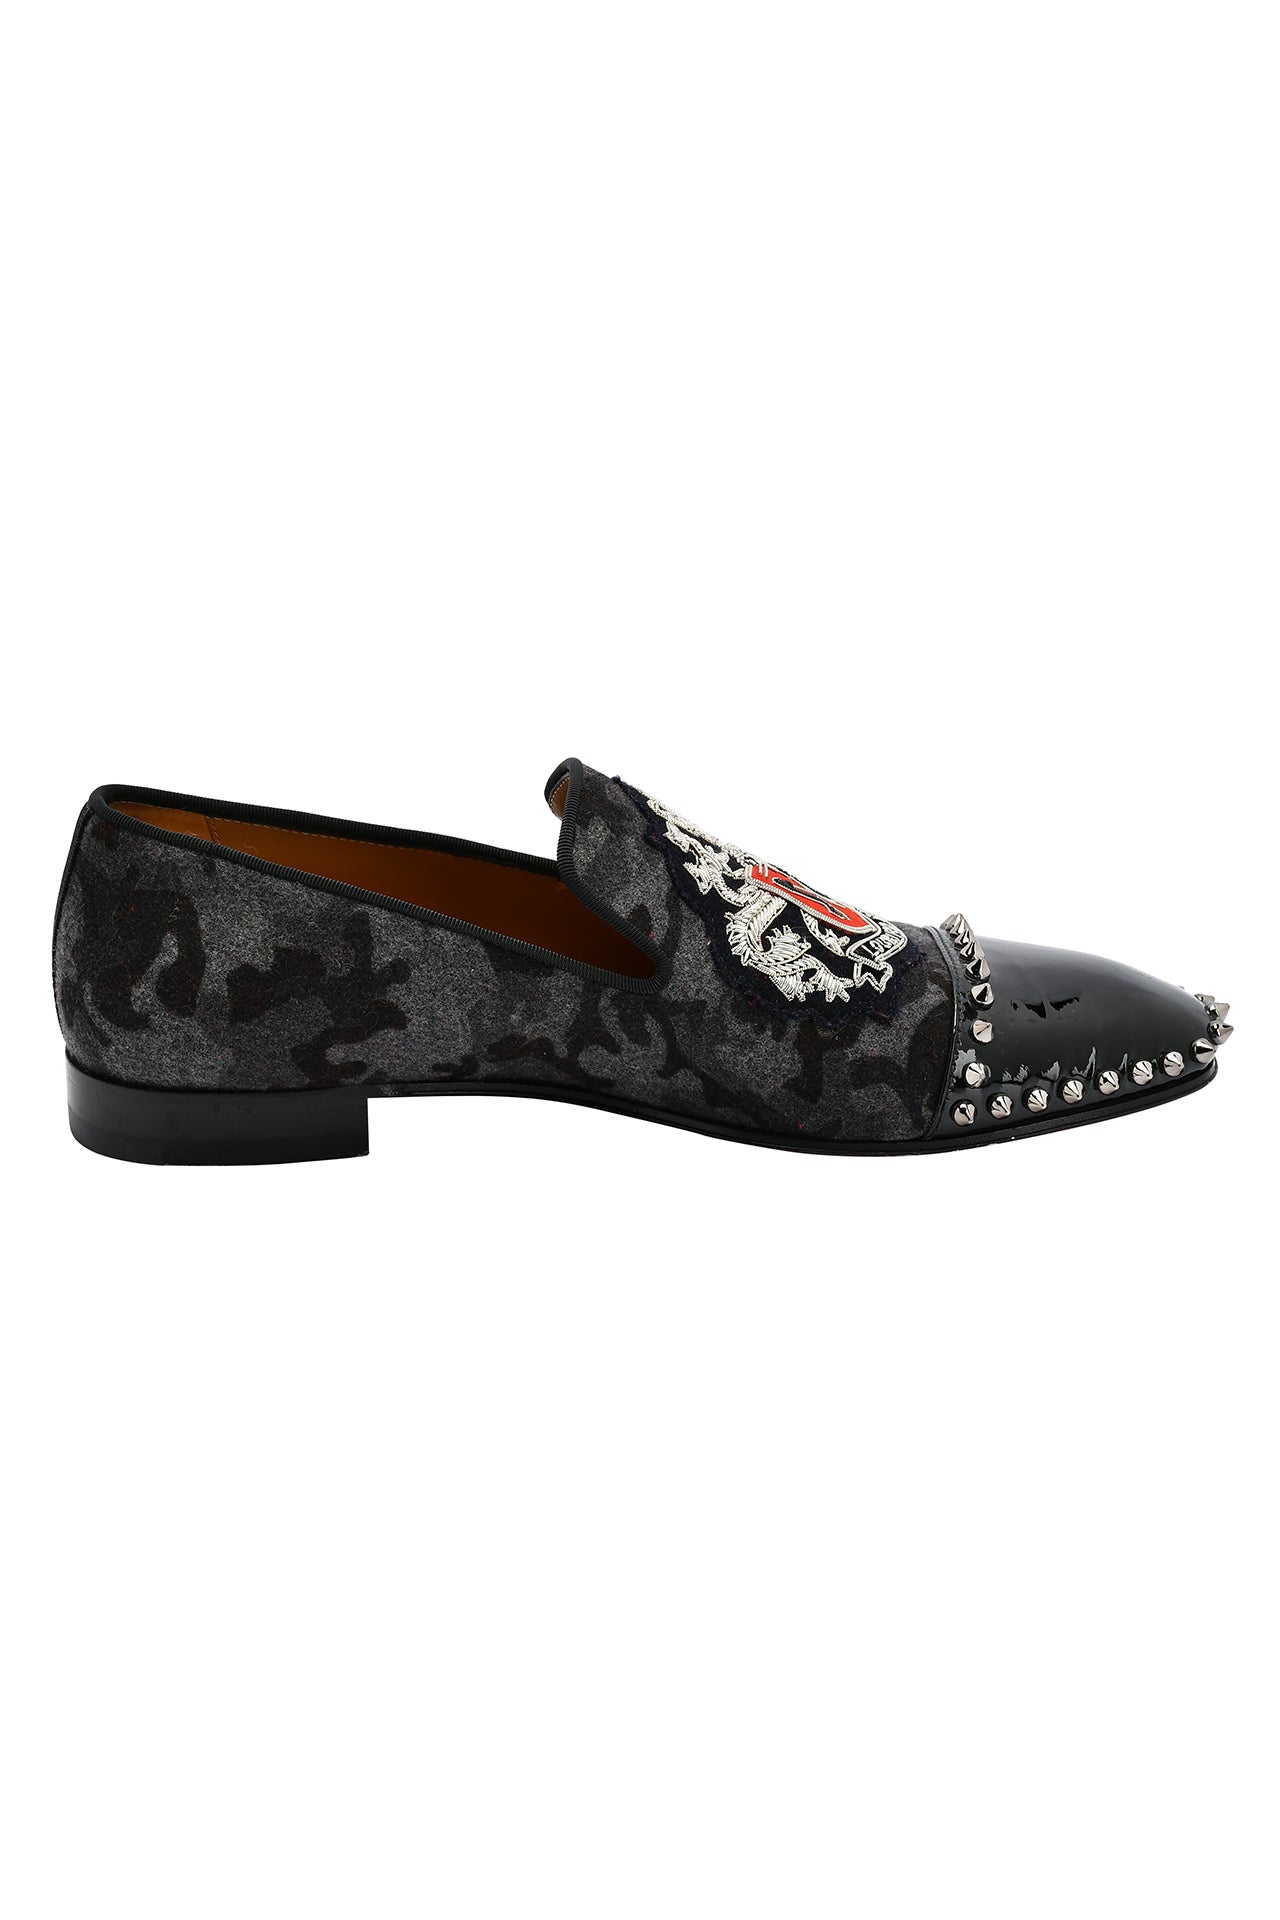 Christian Louboutin Black Suede and Patent Leather Loubi Forever Spike Loafers EU 41